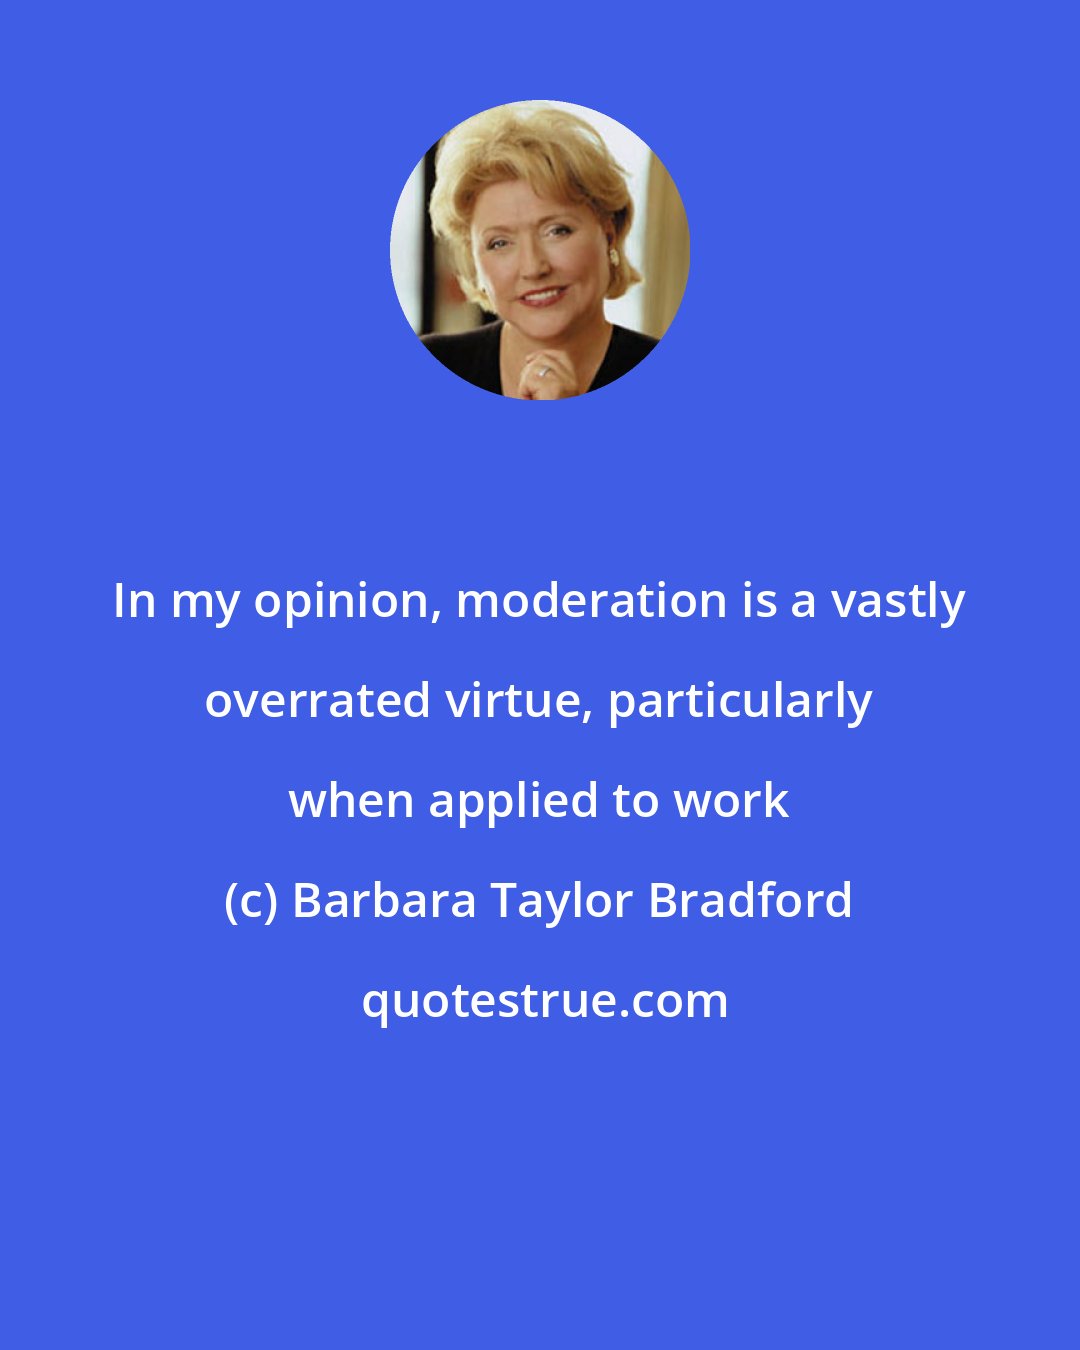 Barbara Taylor Bradford: In my opinion, moderation is a vastly overrated virtue, particularly when applied to work